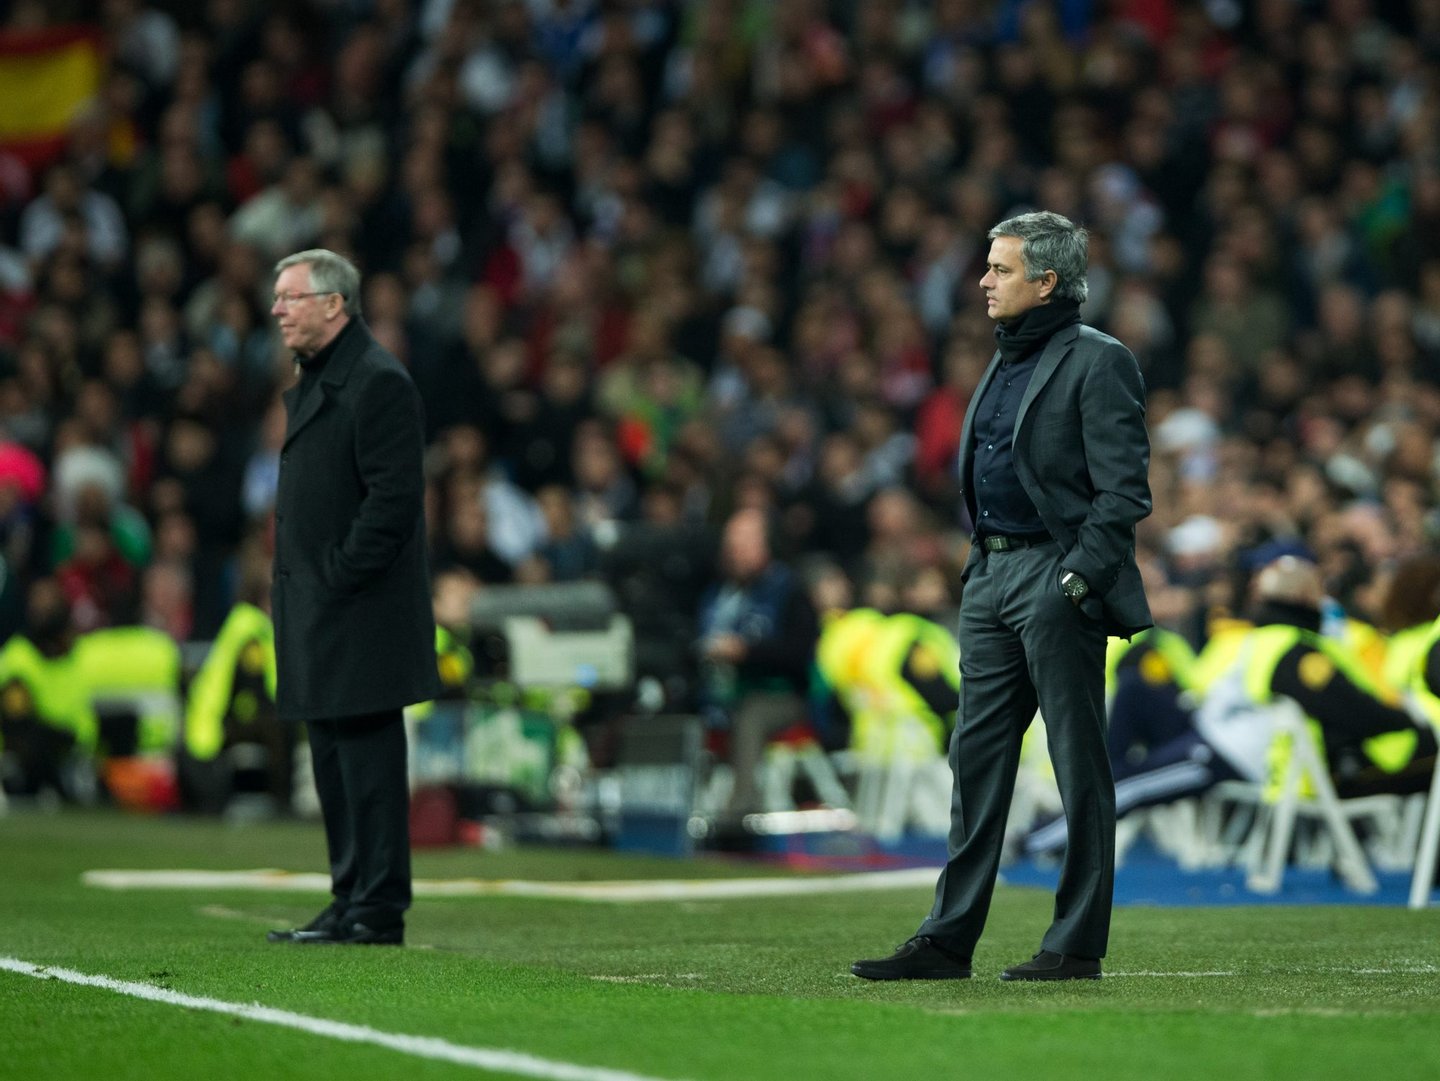 MADRID, SPAIN - FEBRUARY 13: Head coach Jose Mourinho (R) of Real Madrid stands besides Sir Alex Ferguson, manager of Manchester United, during the UEFA Champions League Round of 16 first leg match between Real Madrid and Manchester United at Estadio Santiago Bernabeu on February 13, 2013 in Madrid, Spain. (Photo by Jasper Juinen/Getty Images)